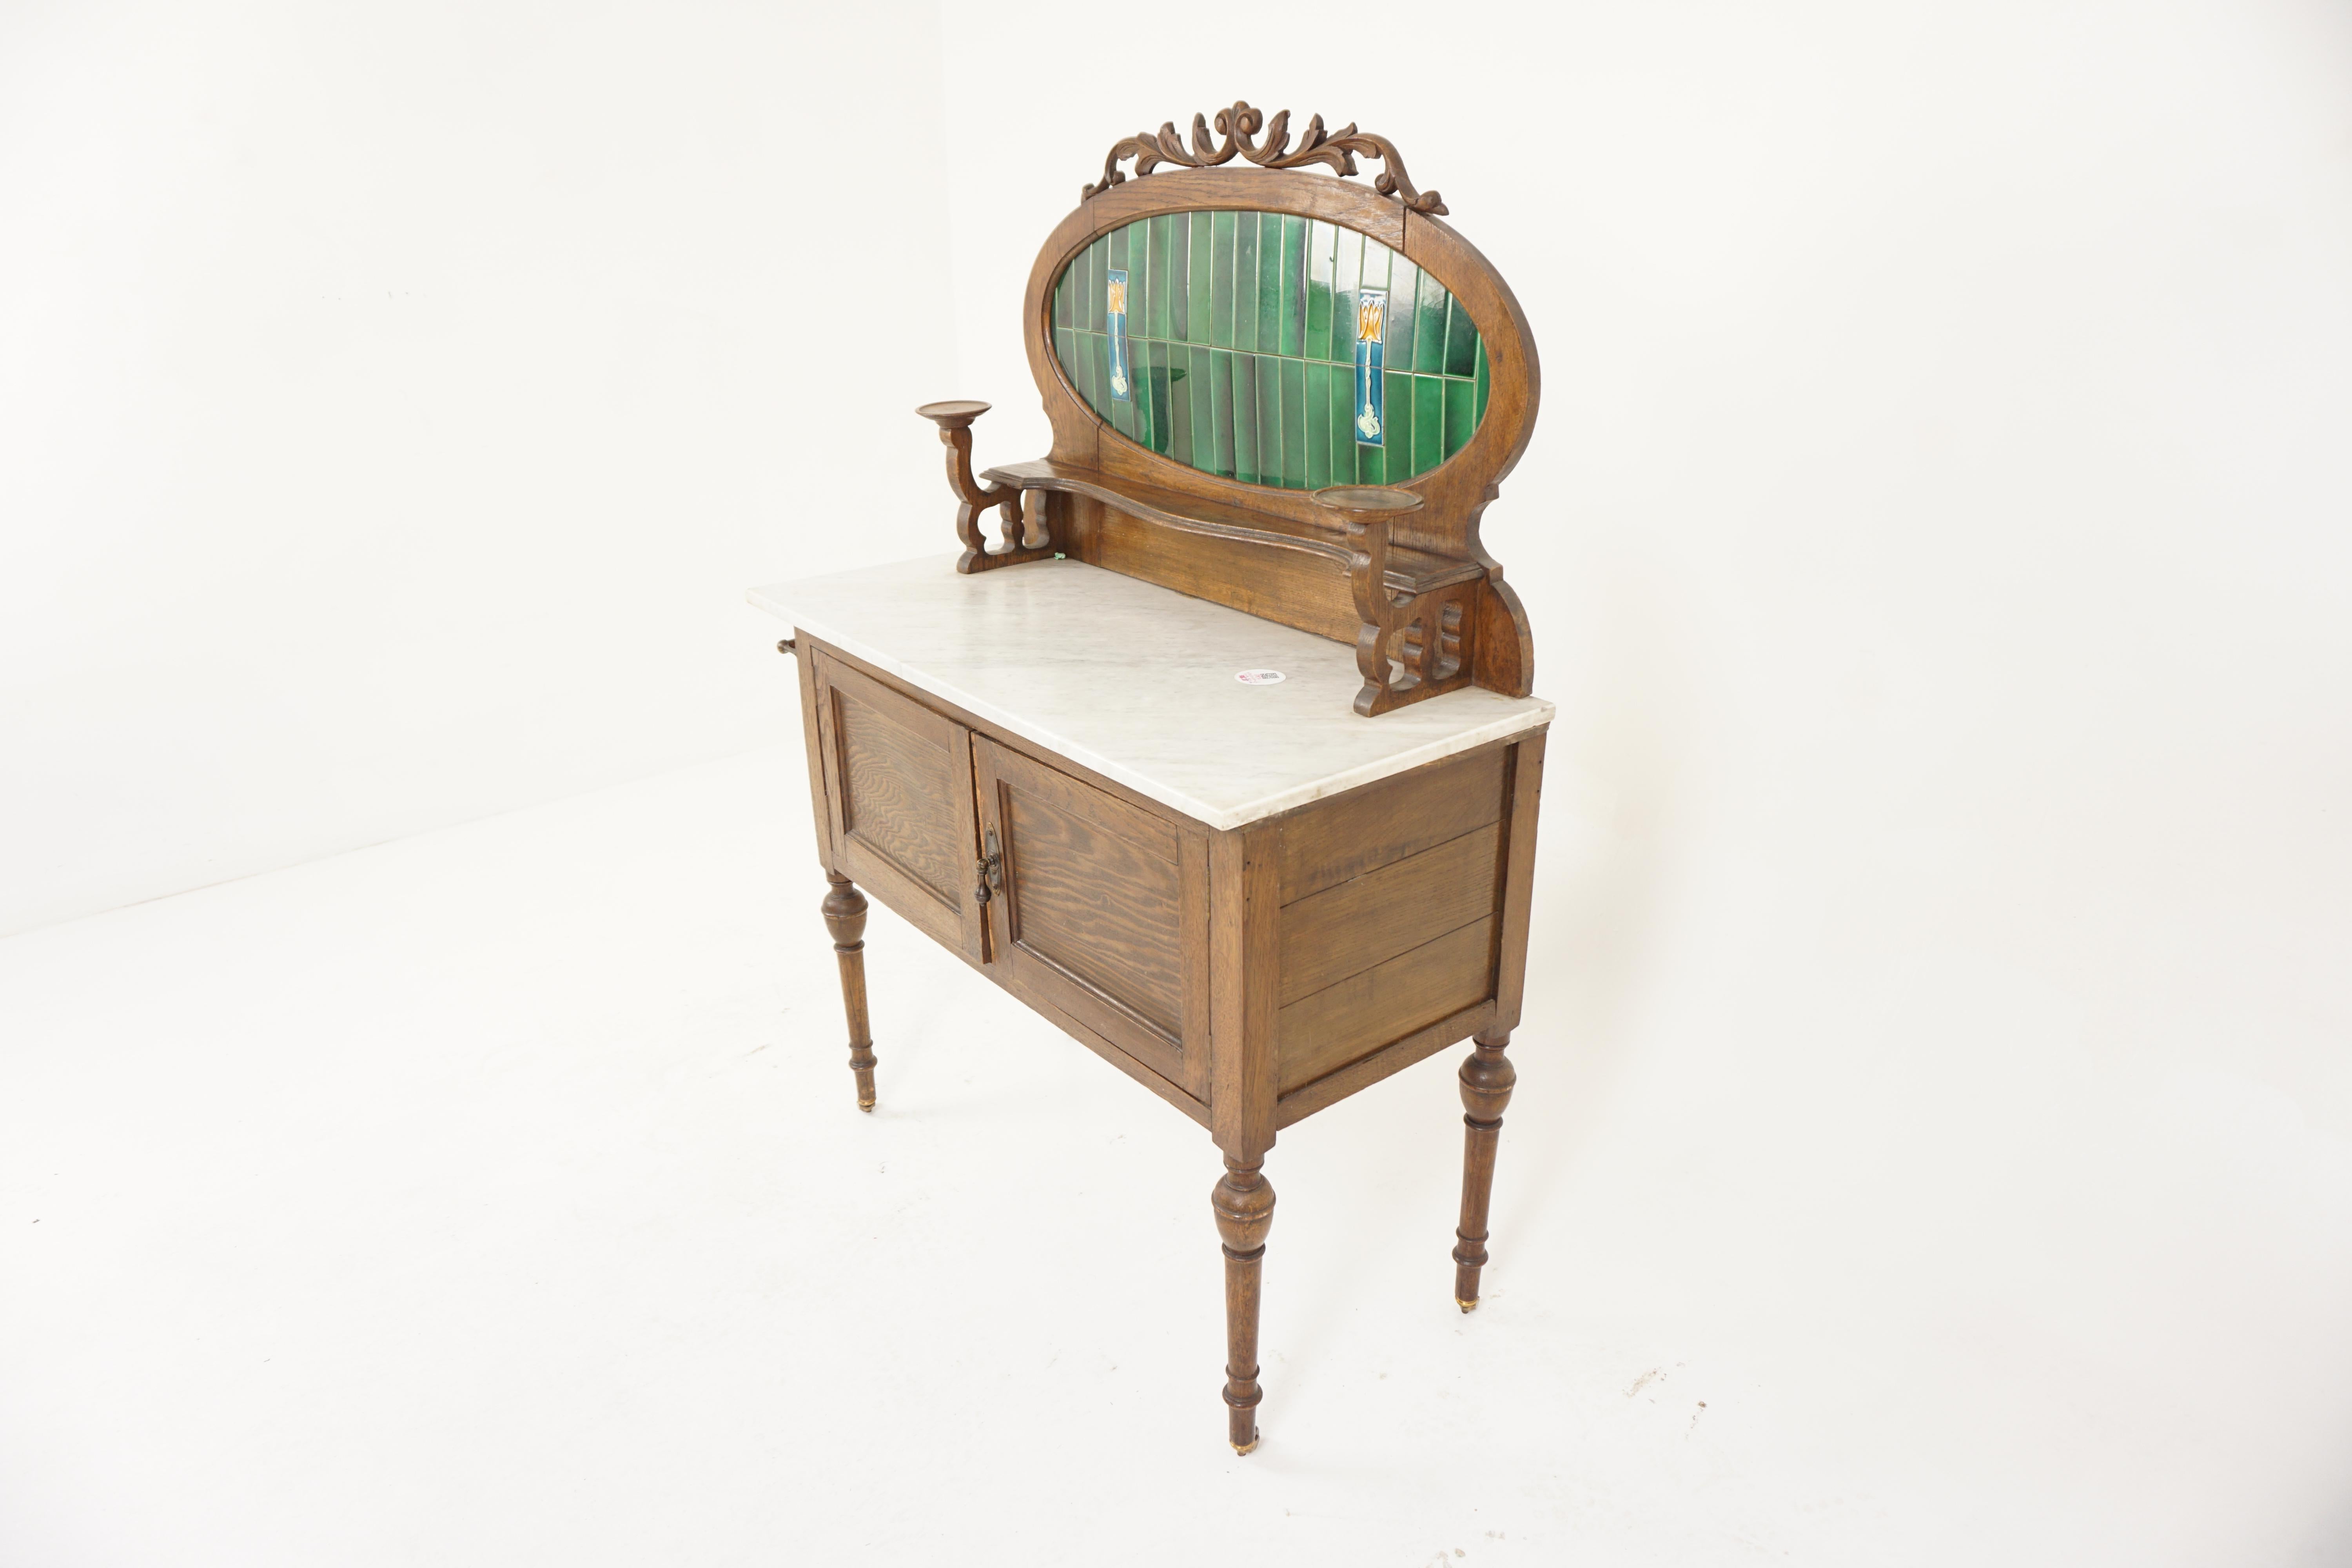 Arts and Crafts marble top washstand, dry sink, Scotland 1910, H887

Scotland 1910
Solid Oak
Original Finish
Ornate carving to the top of the oval shape green tiled backsplash
Shaped shelf below
Flanked by a pair of raised candle stick